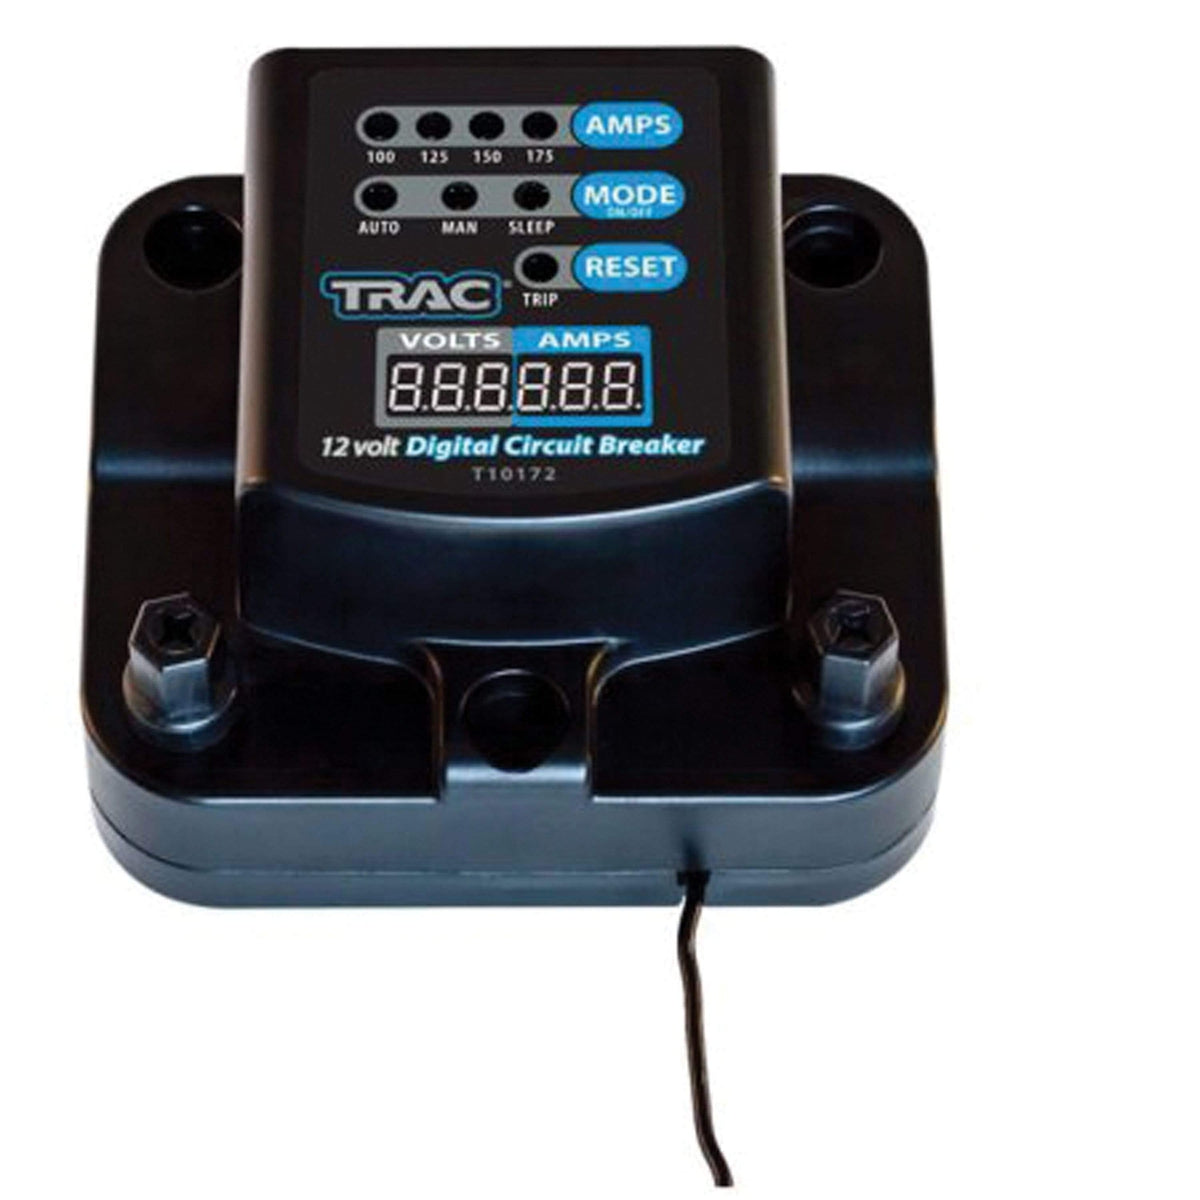 Trac Outdoors Digital Circuit Breakers 100-175a with Display #69403